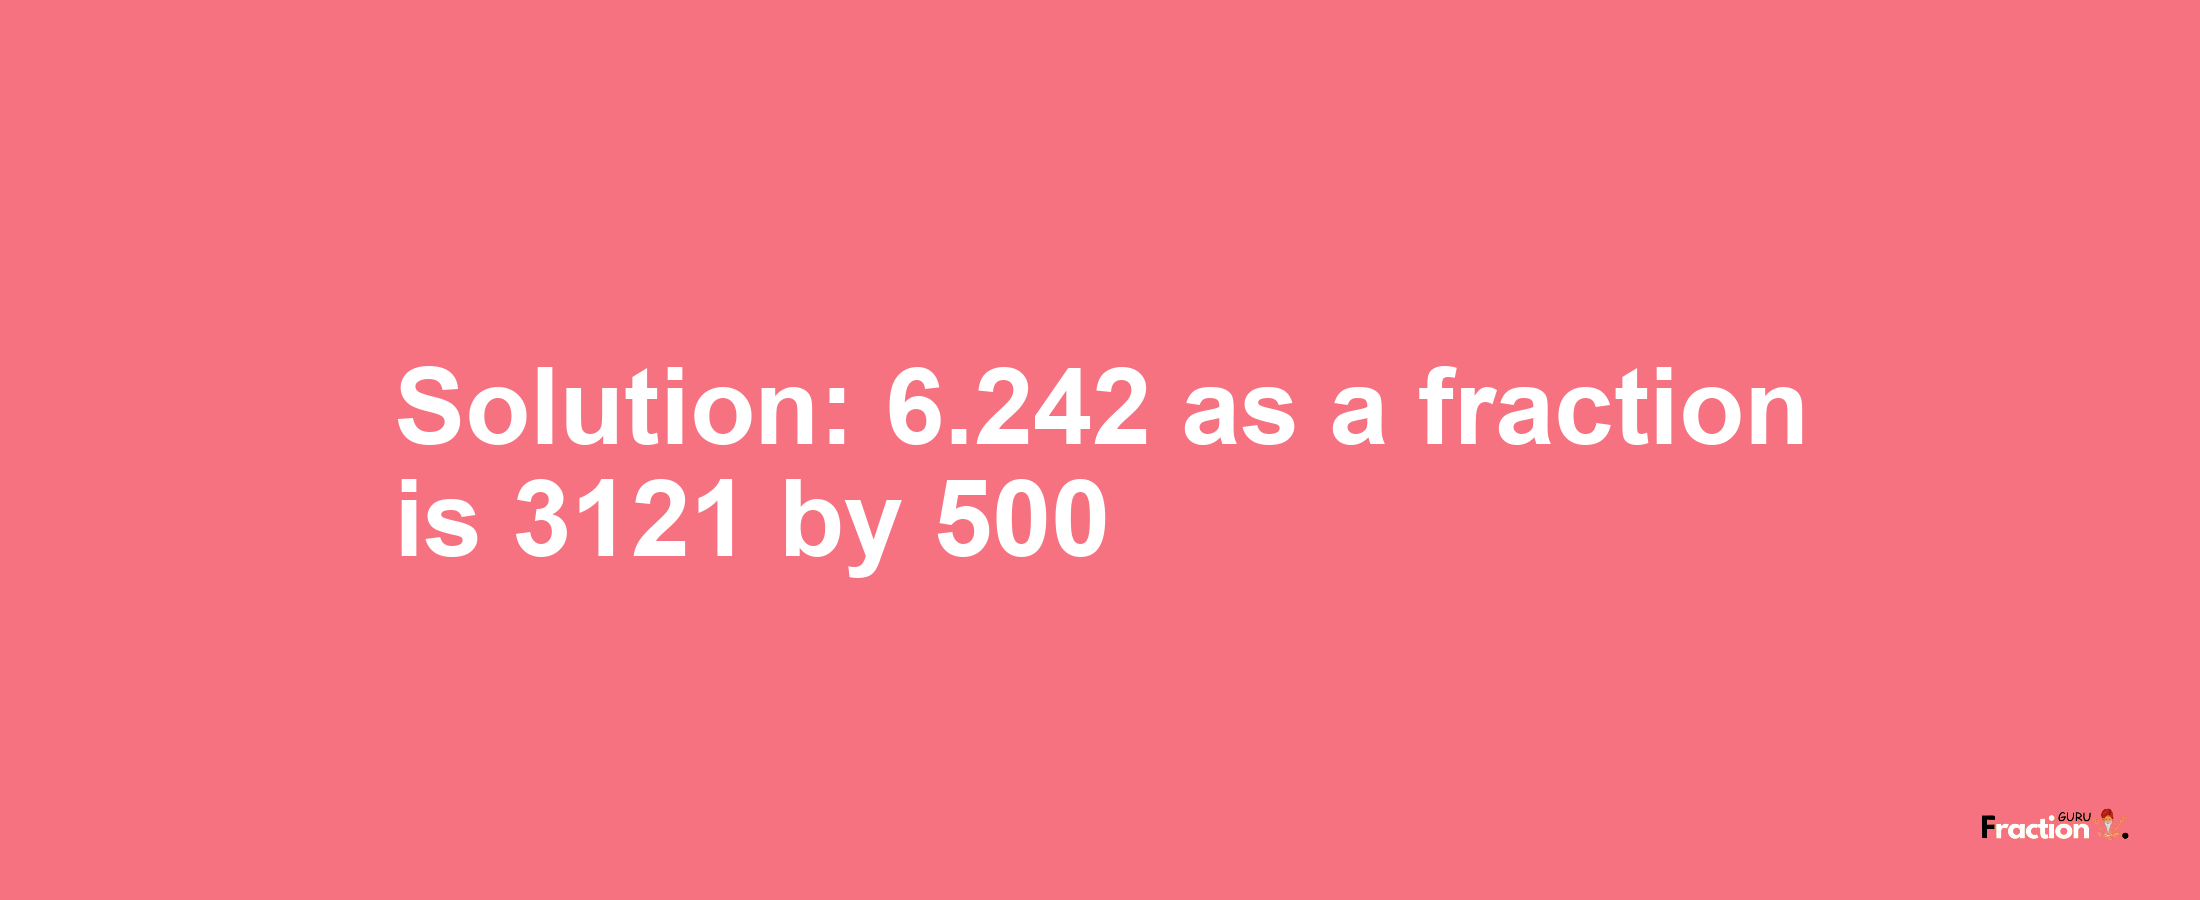 Solution:6.242 as a fraction is 3121/500